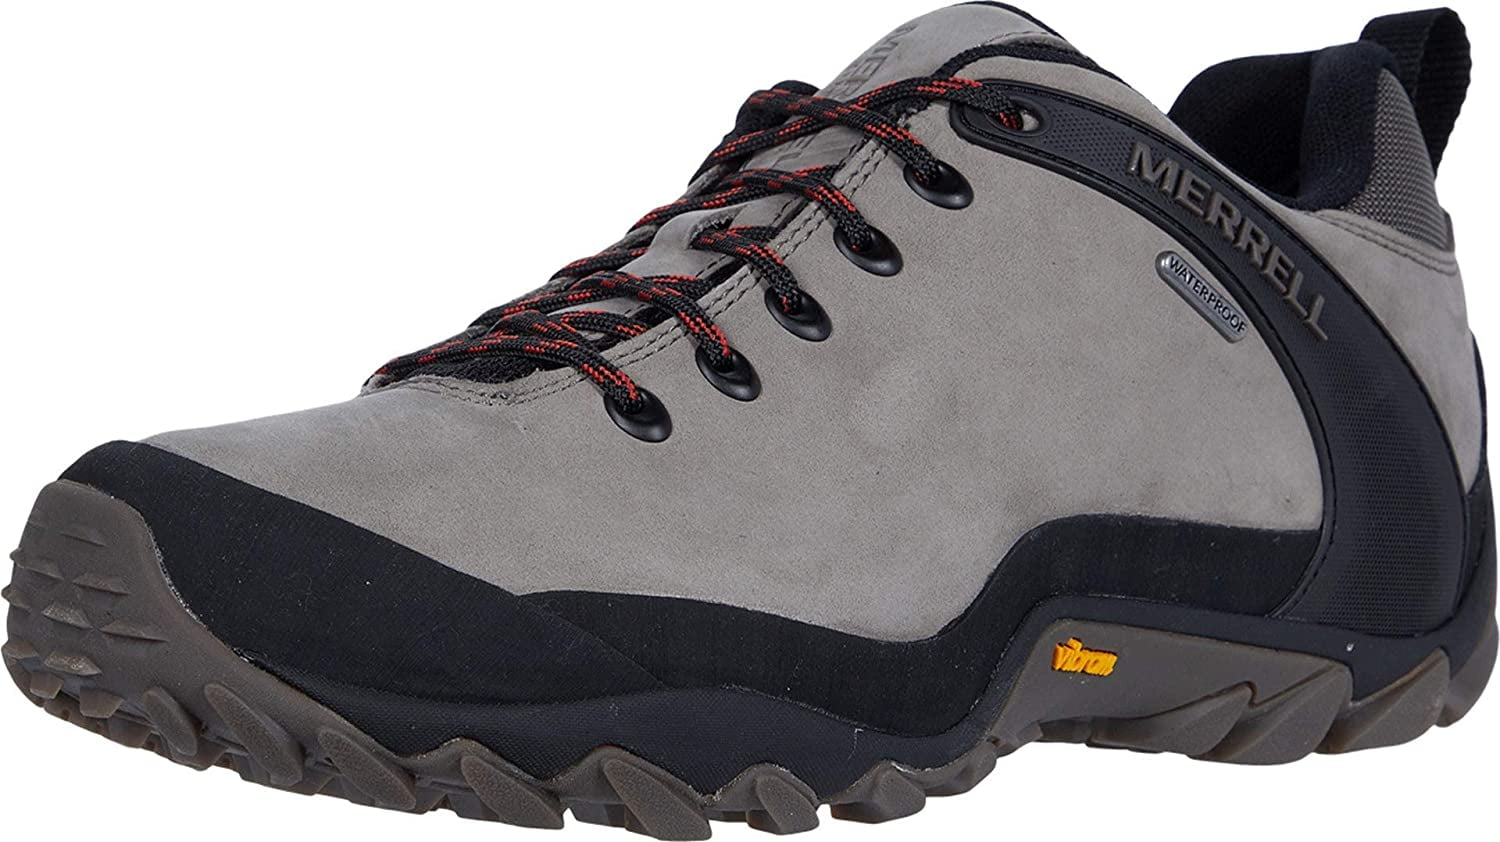 MERRELL Chameleon 8 Vent Outdoor Hiking Trekking Athletic Trainers Shoes Mens 